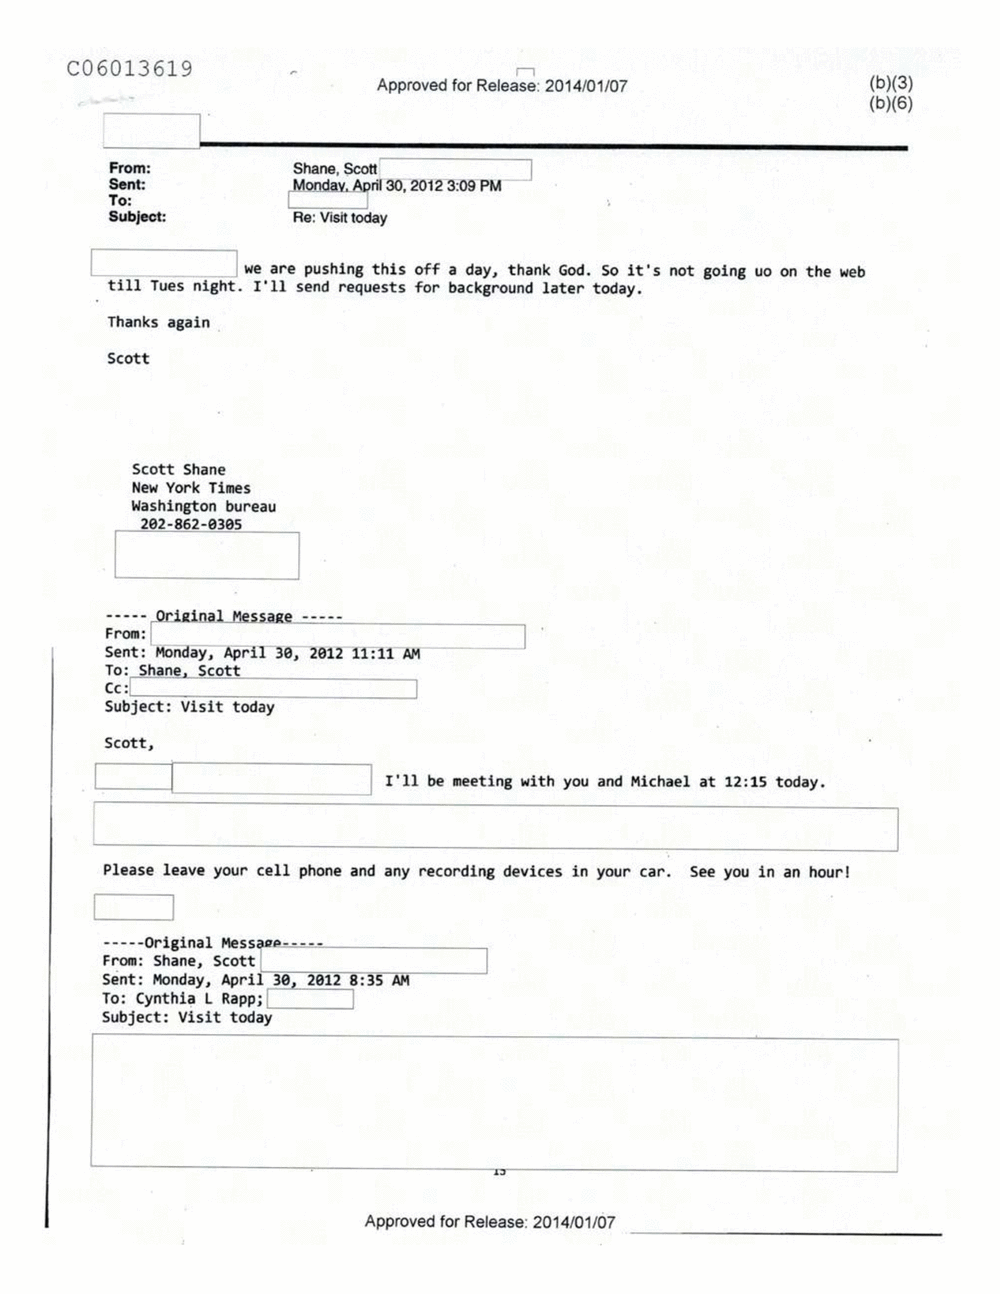 Page 451 from Email Correspondence Between Reporters and CIA Flacks